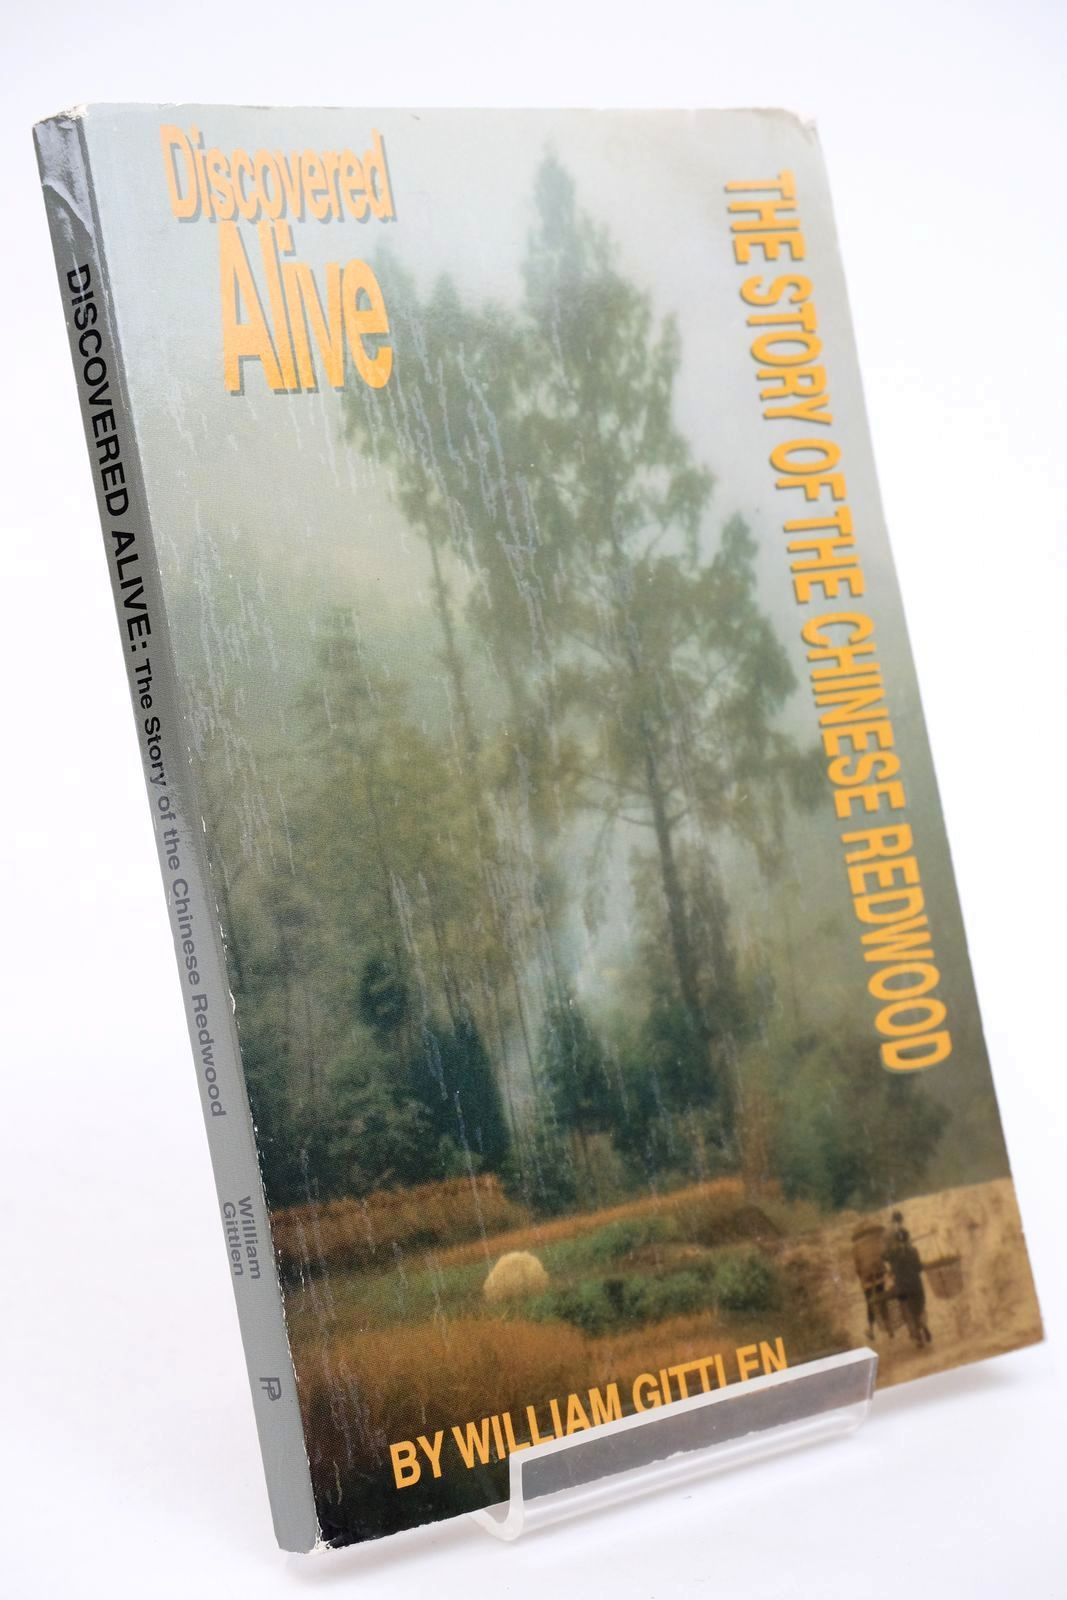 Photo of DISCOVERED ALIVE: THE STORY OF THE CHINESE REDWOOD- Stock Number: 1323029